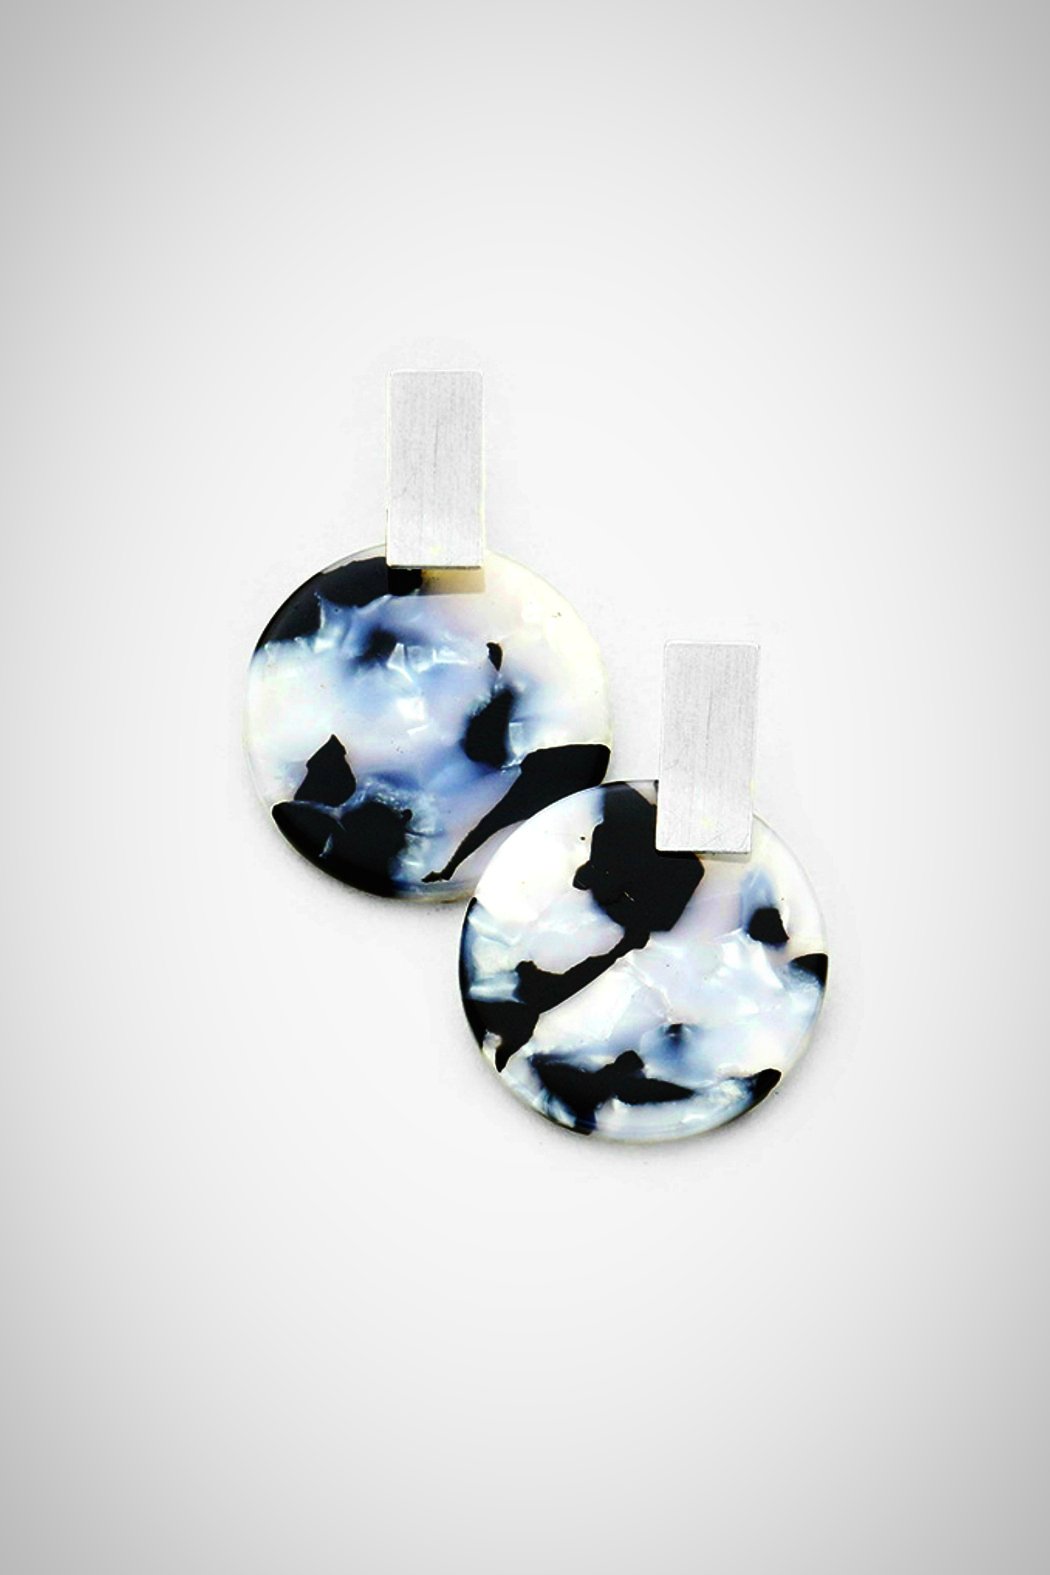 Round It Up Resin Earrings - Embellish Your Life 